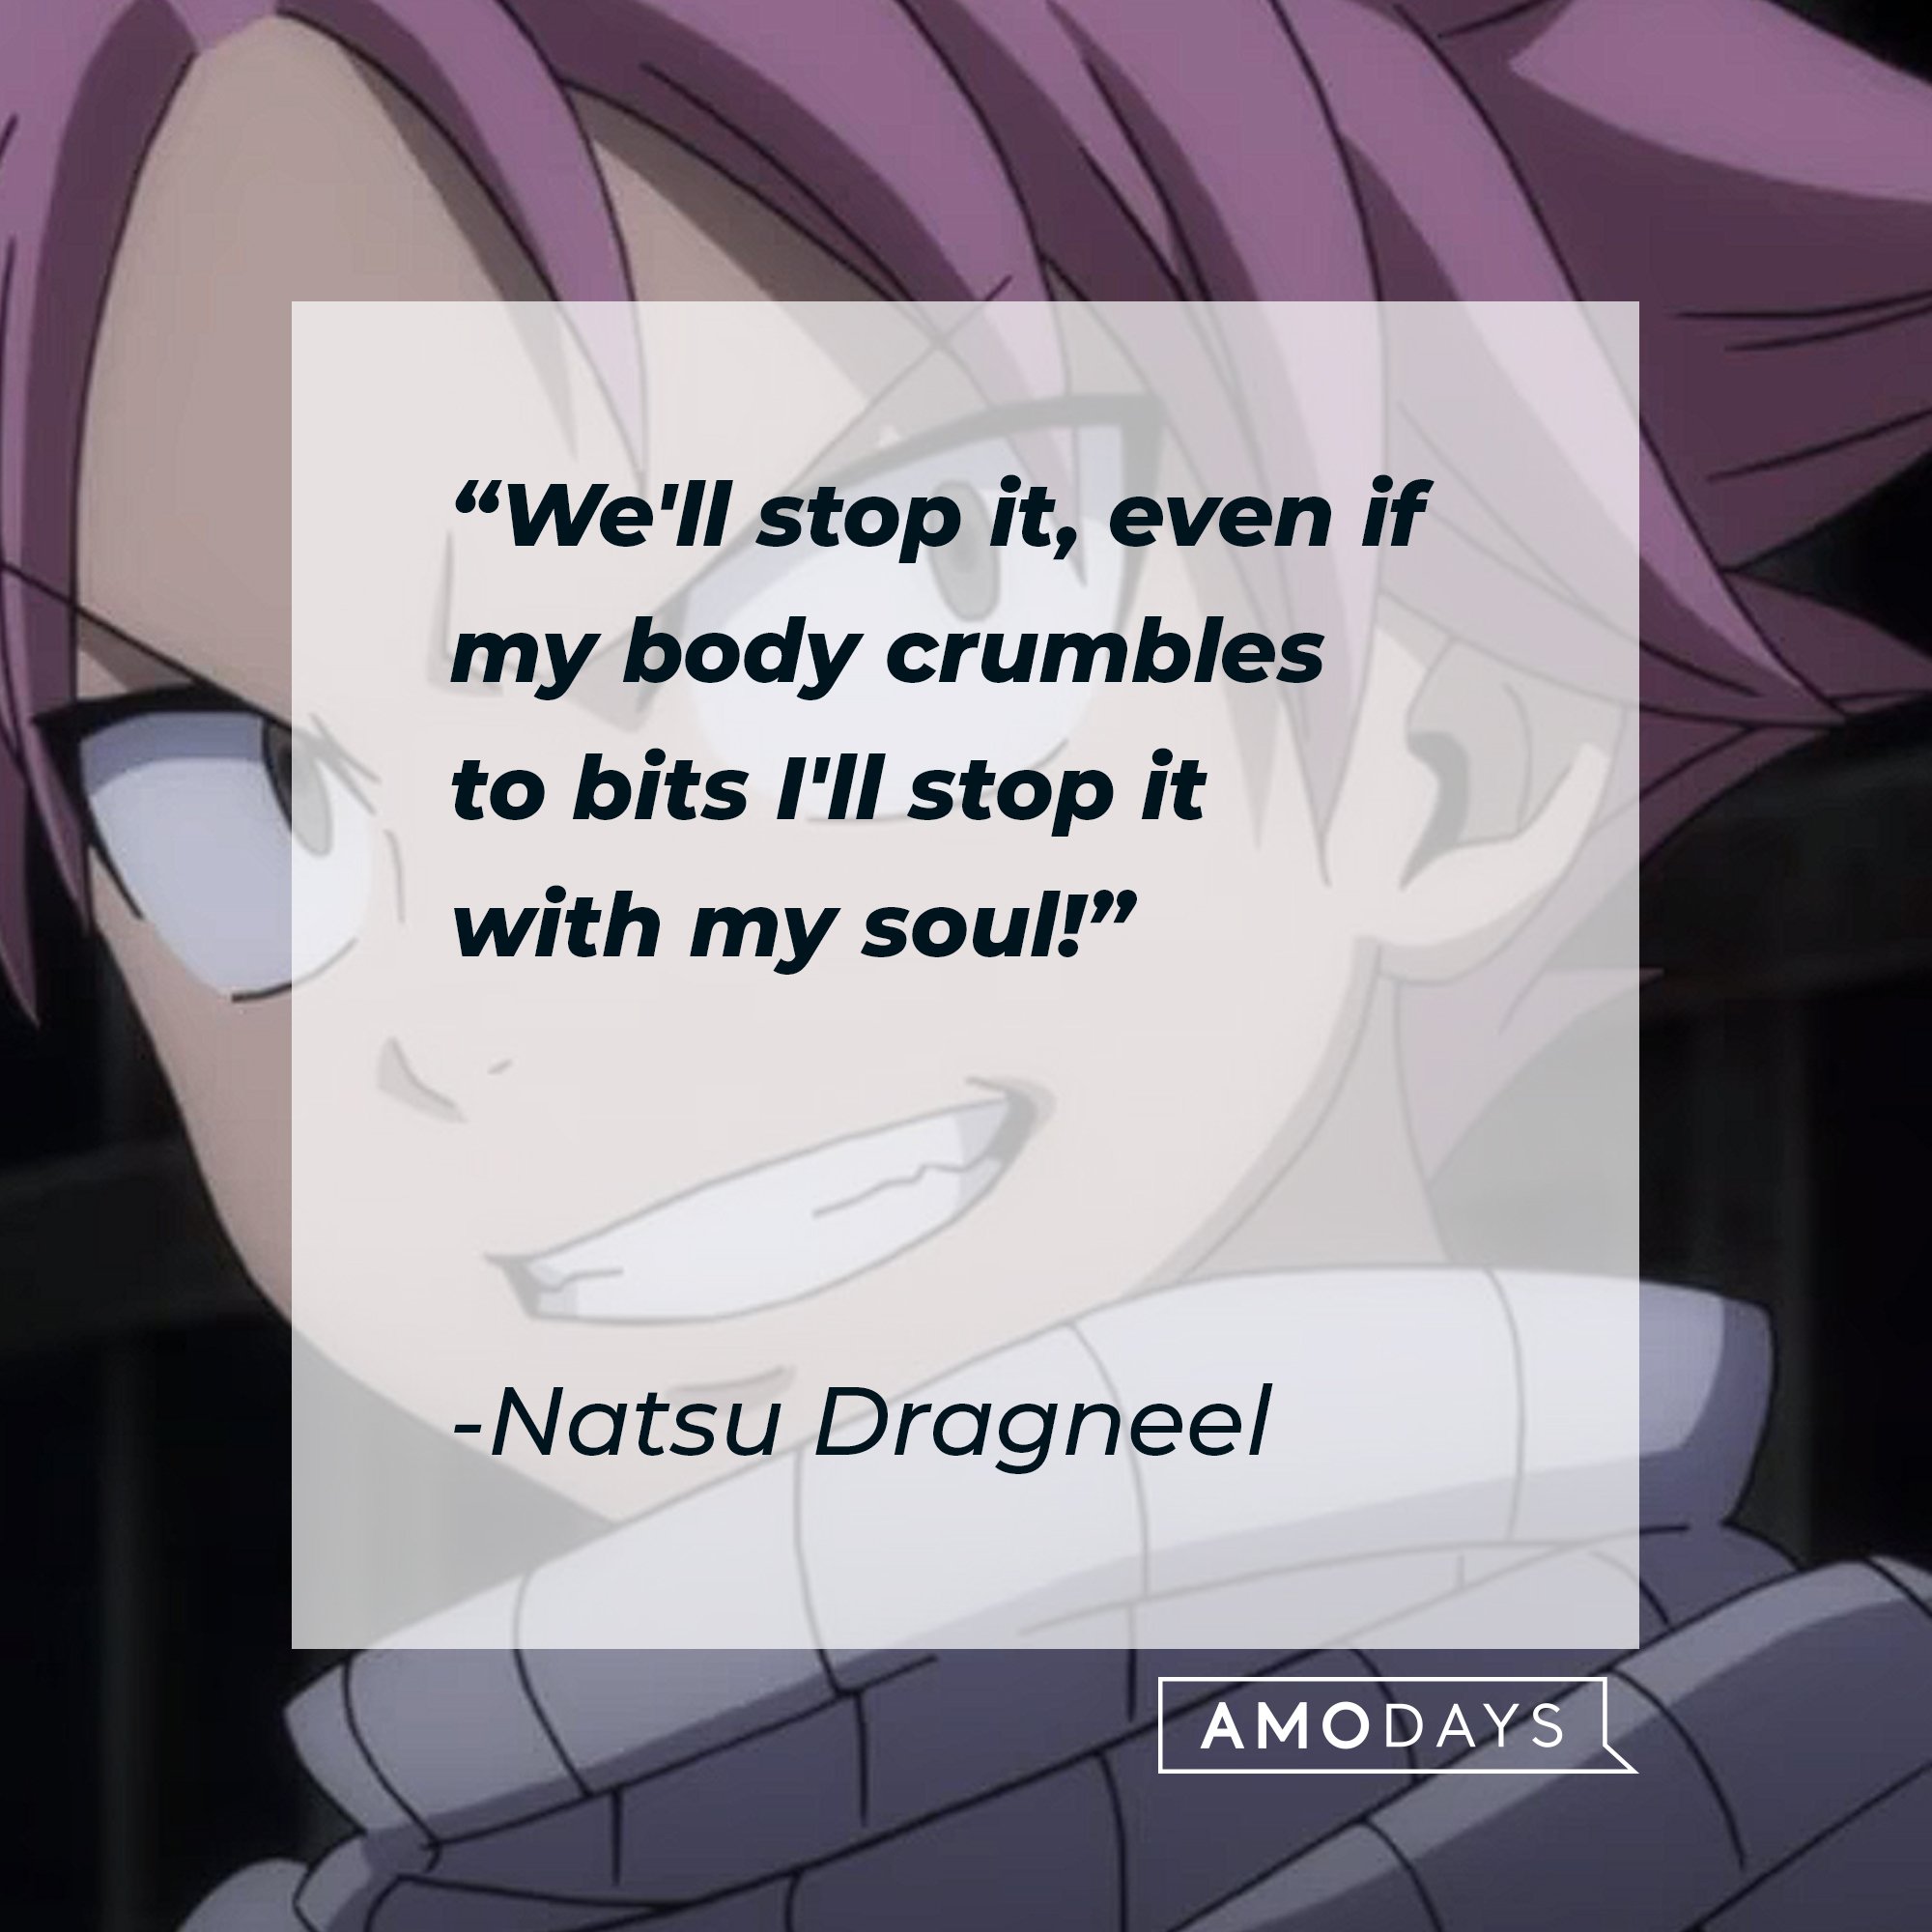 Natsu Dragneel’s quote: "We'll stop it, even if my body crumbles to bits, I'll stop it with my soul!" | Image: AmoDays